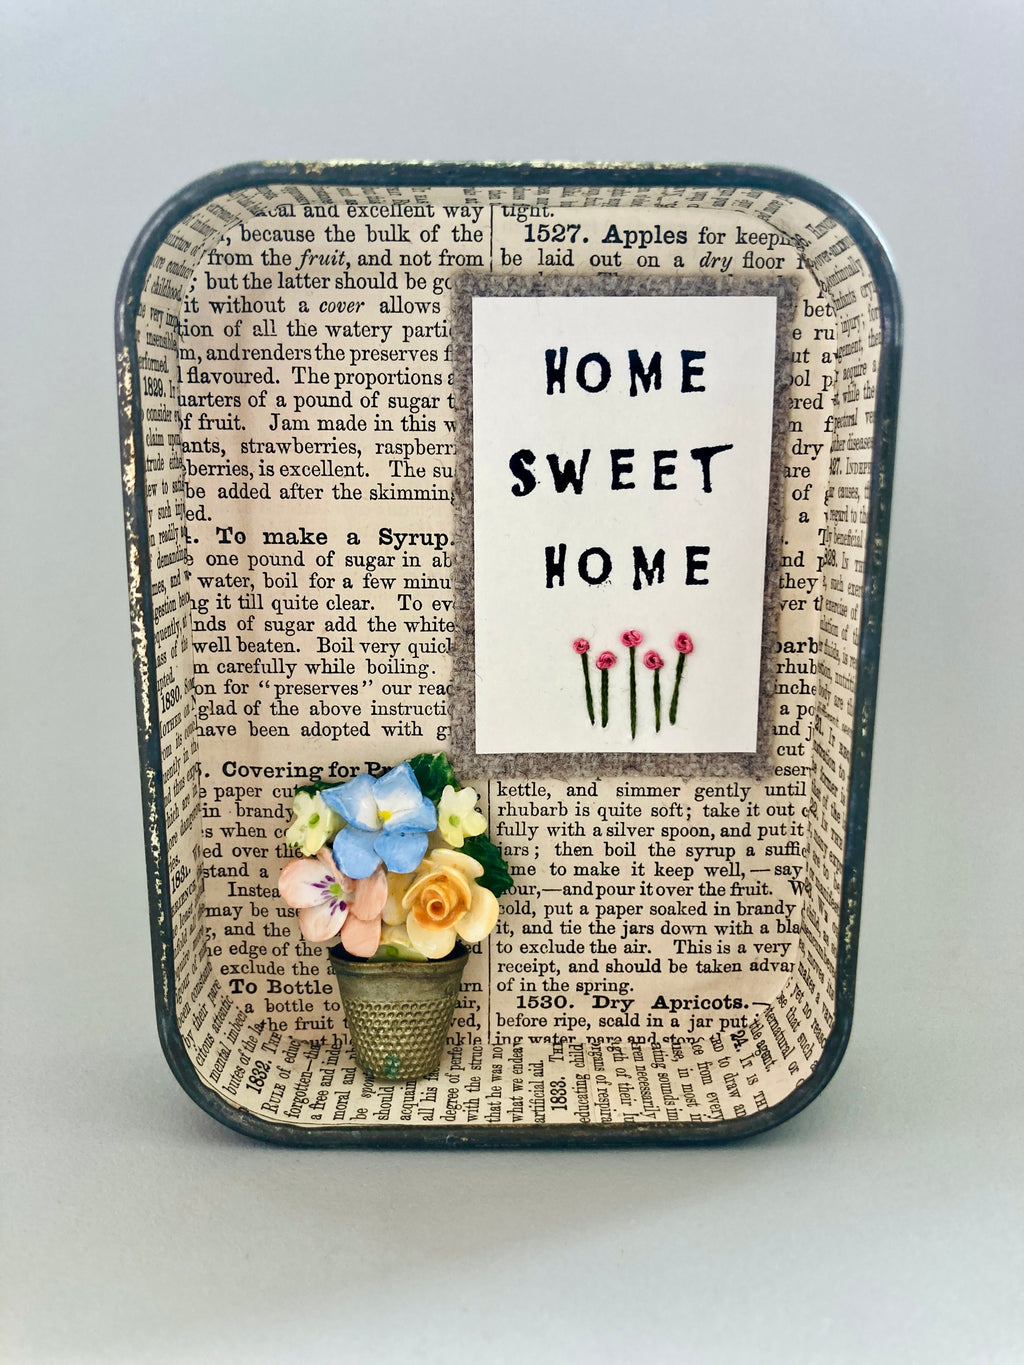 Home sweet home - large